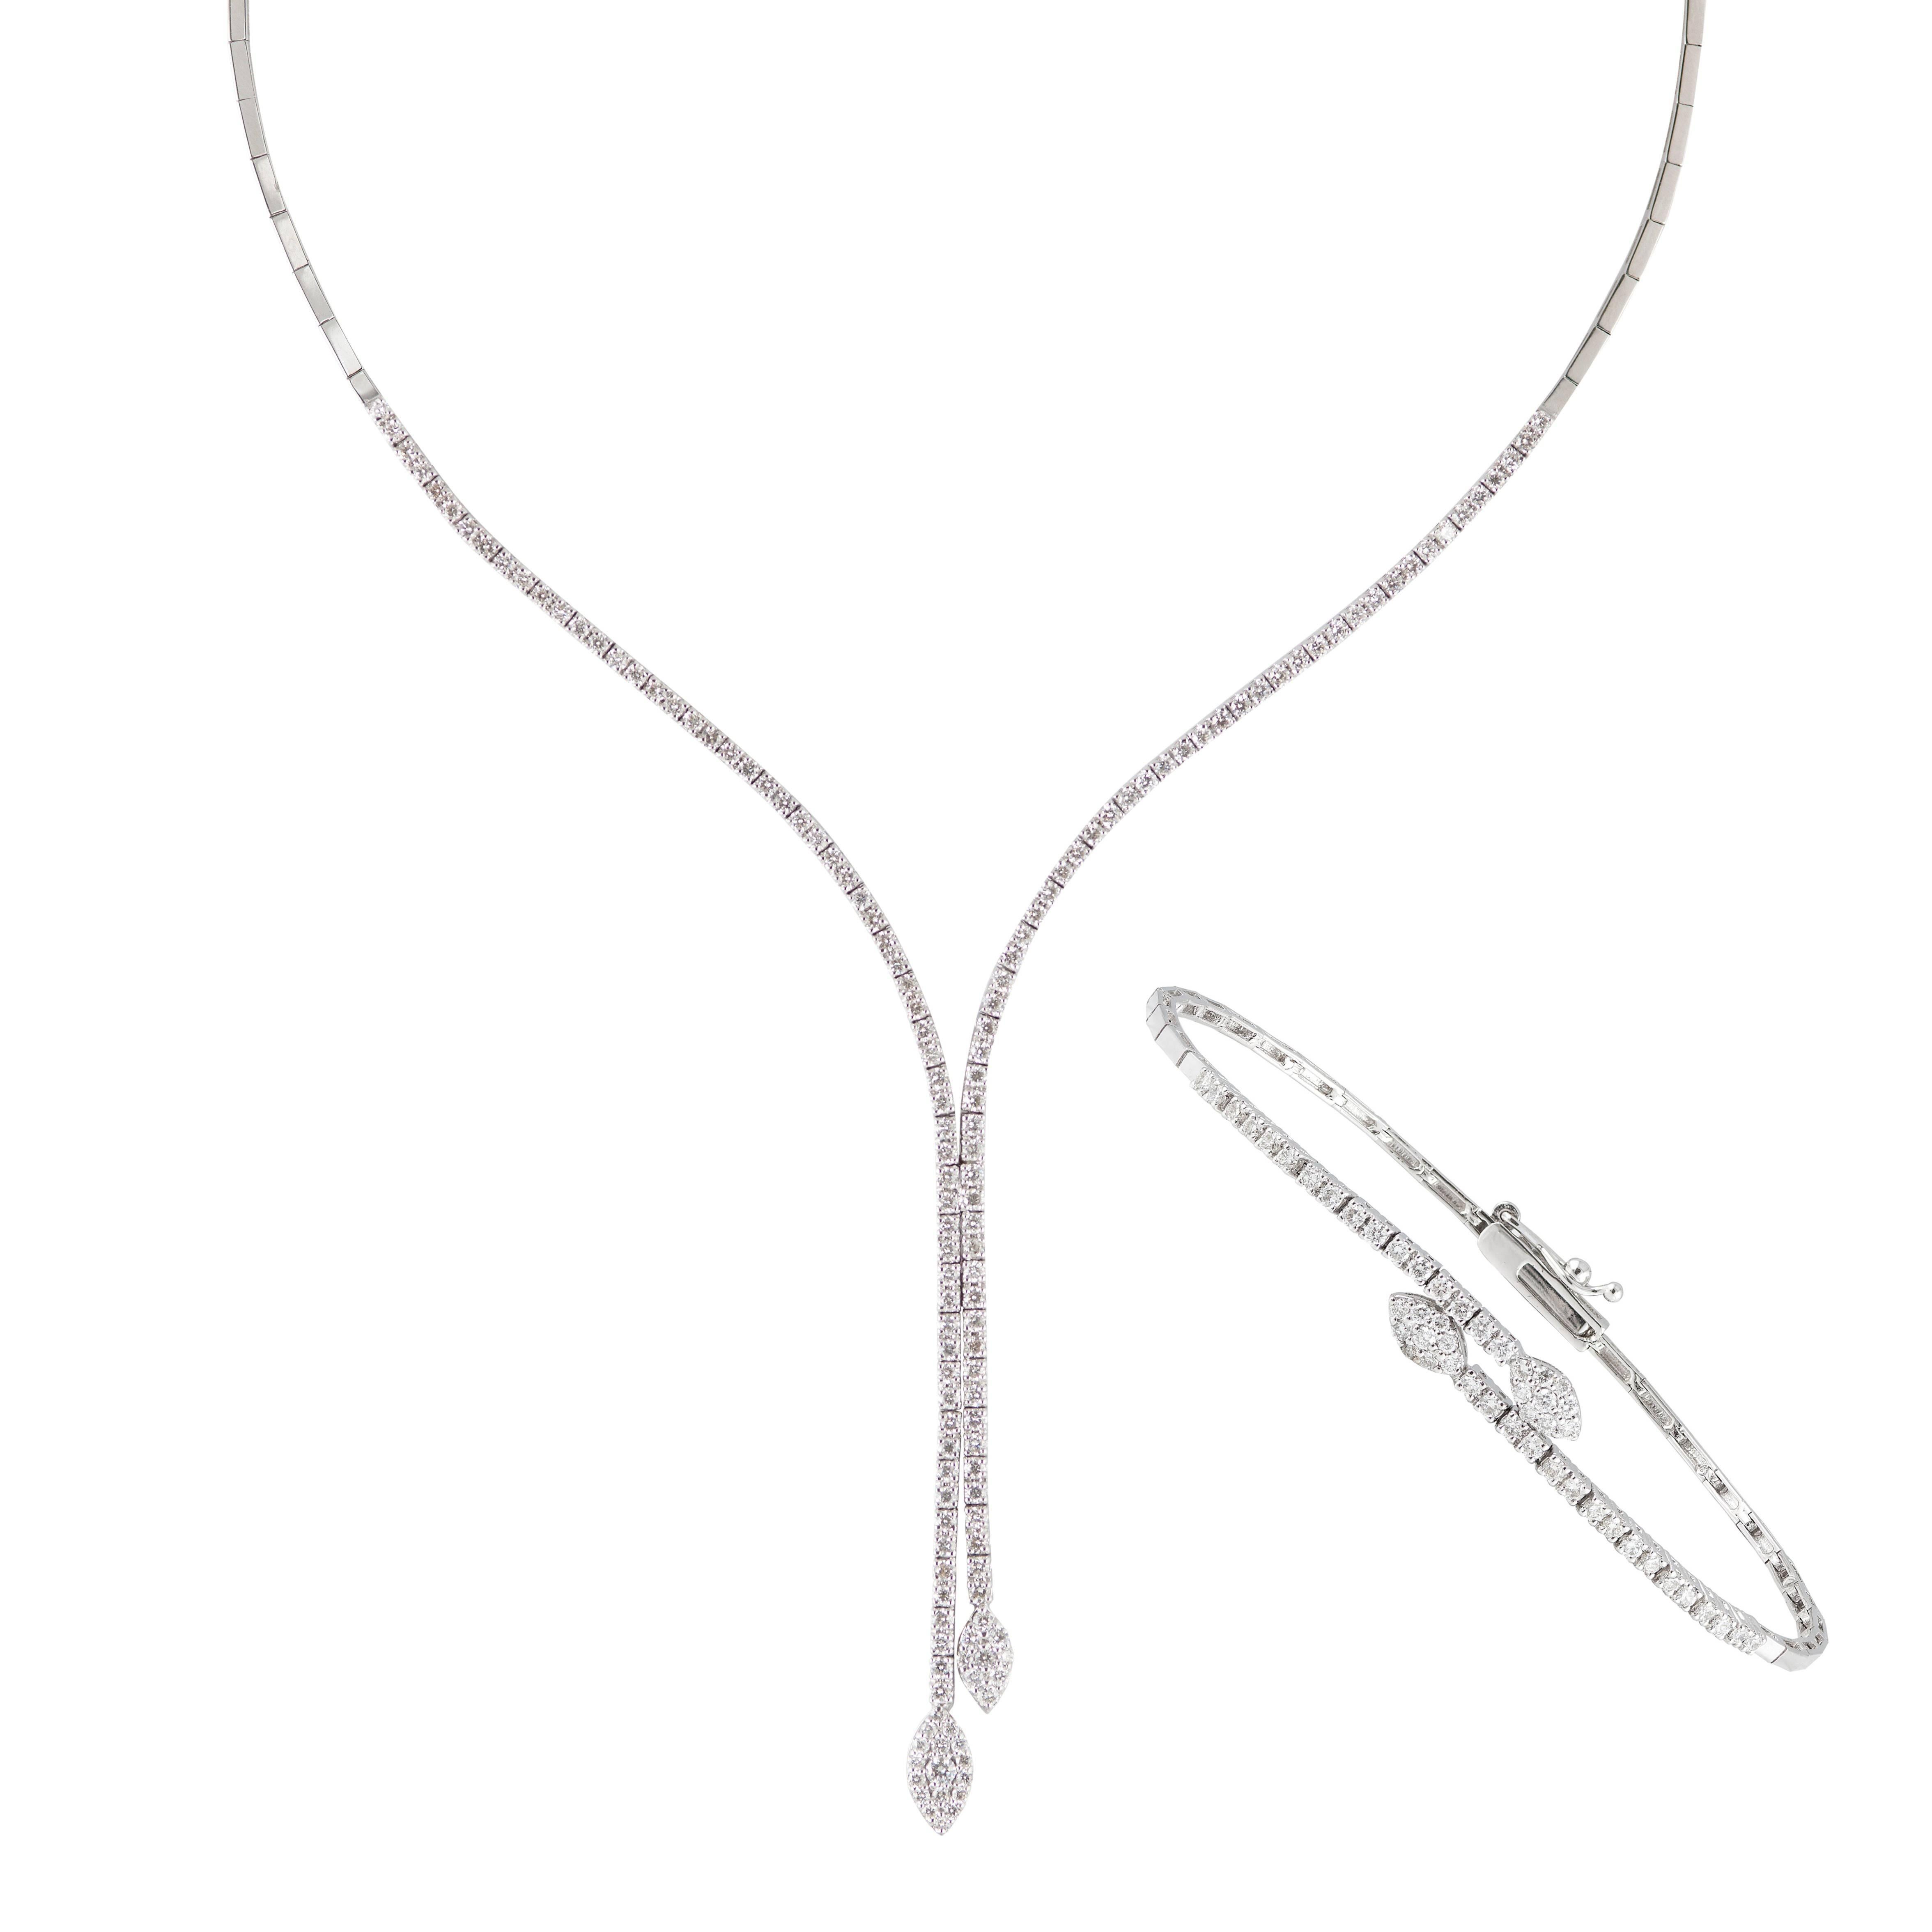  18 Karat White Gold Diamond Marquise Set of Necklace and Bracelet  For Sale